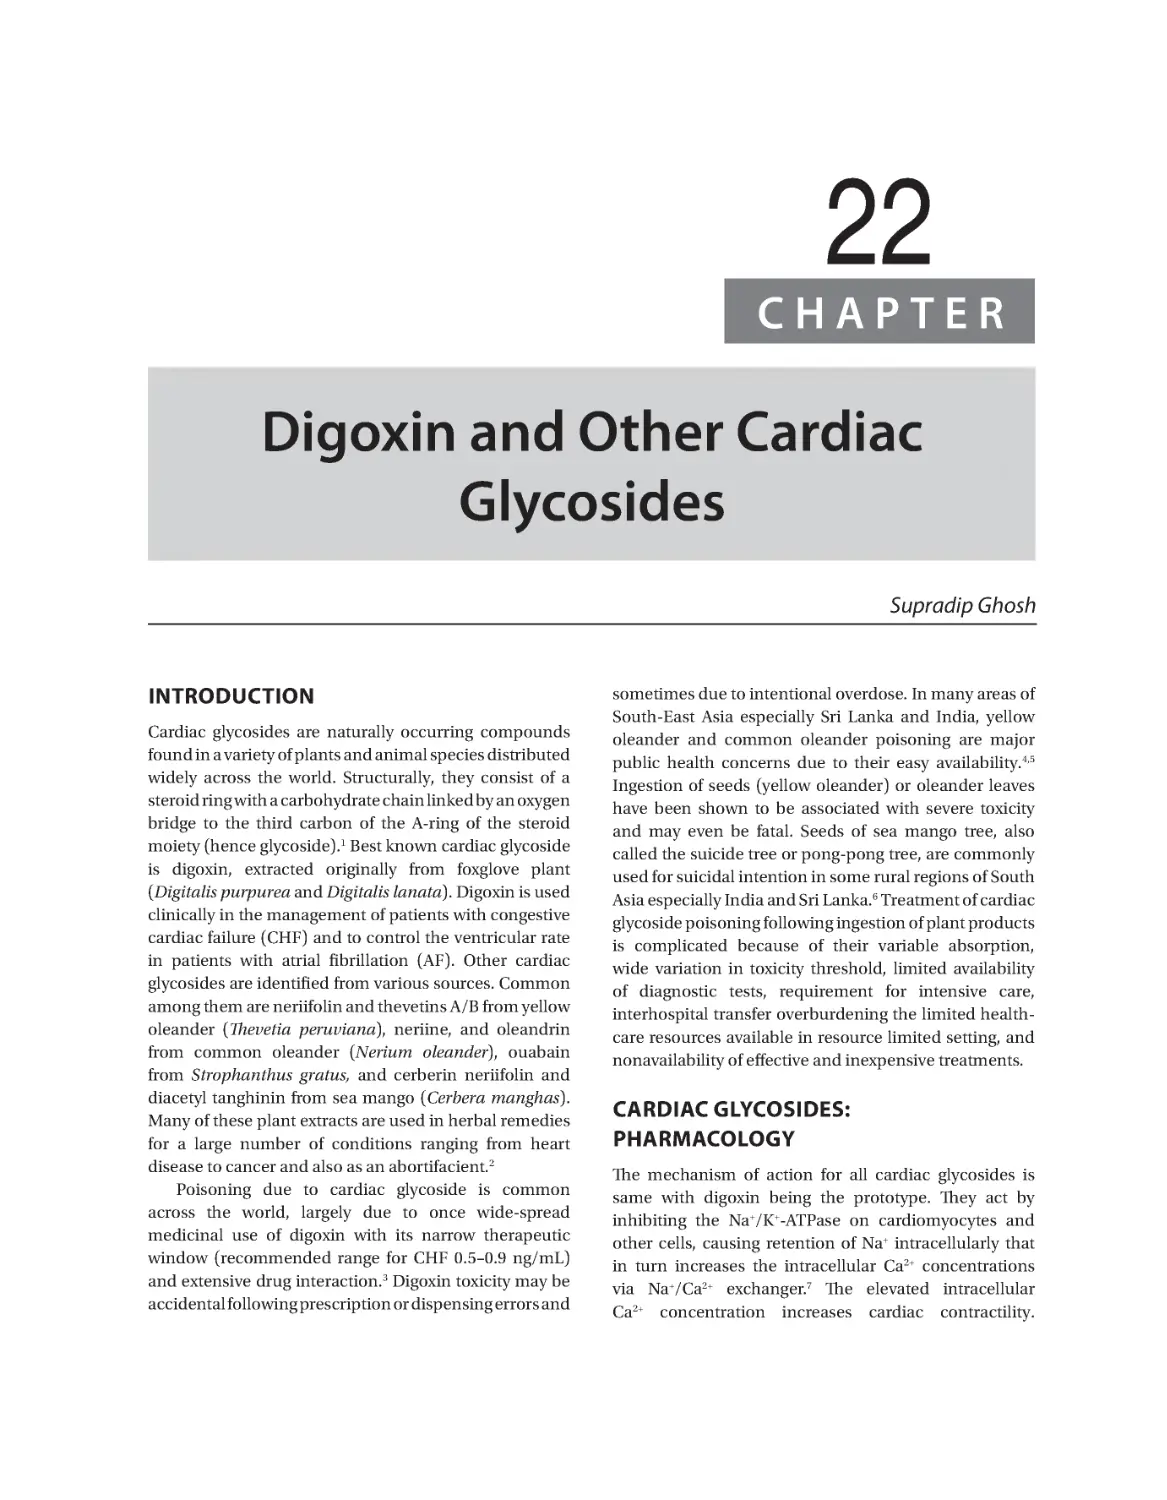 Chapter 22: Digoxin and Other Cardiac Glycosides